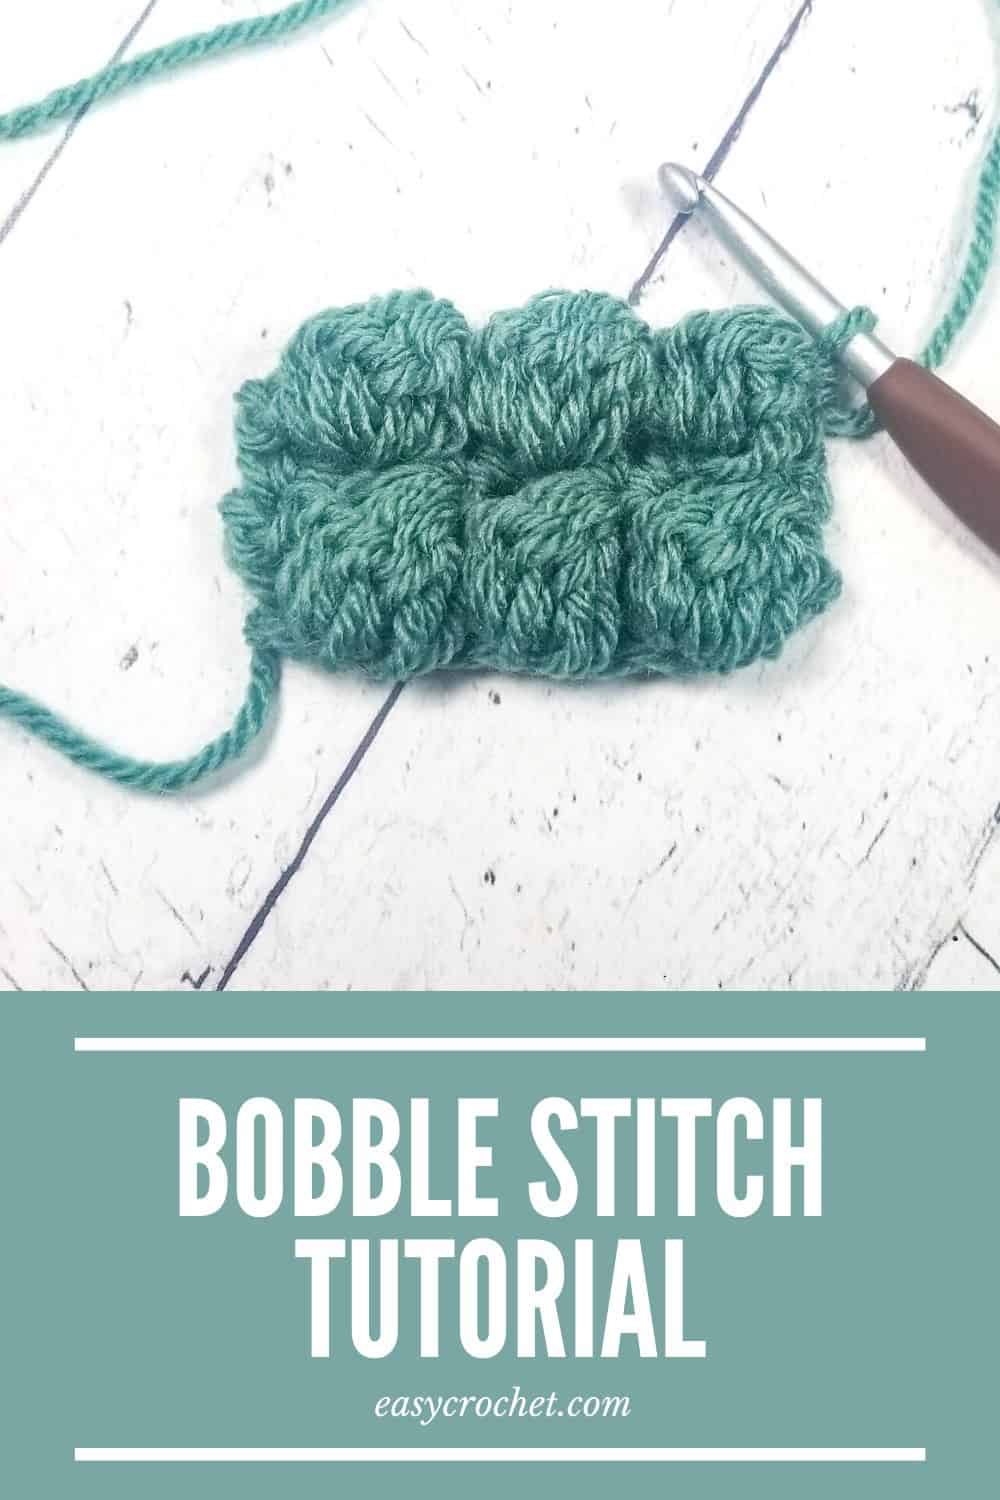 Learn how to crochet a bobble stitch with our free written and video tutorial. Learn more at easycrochet.com via @easycrochetcom